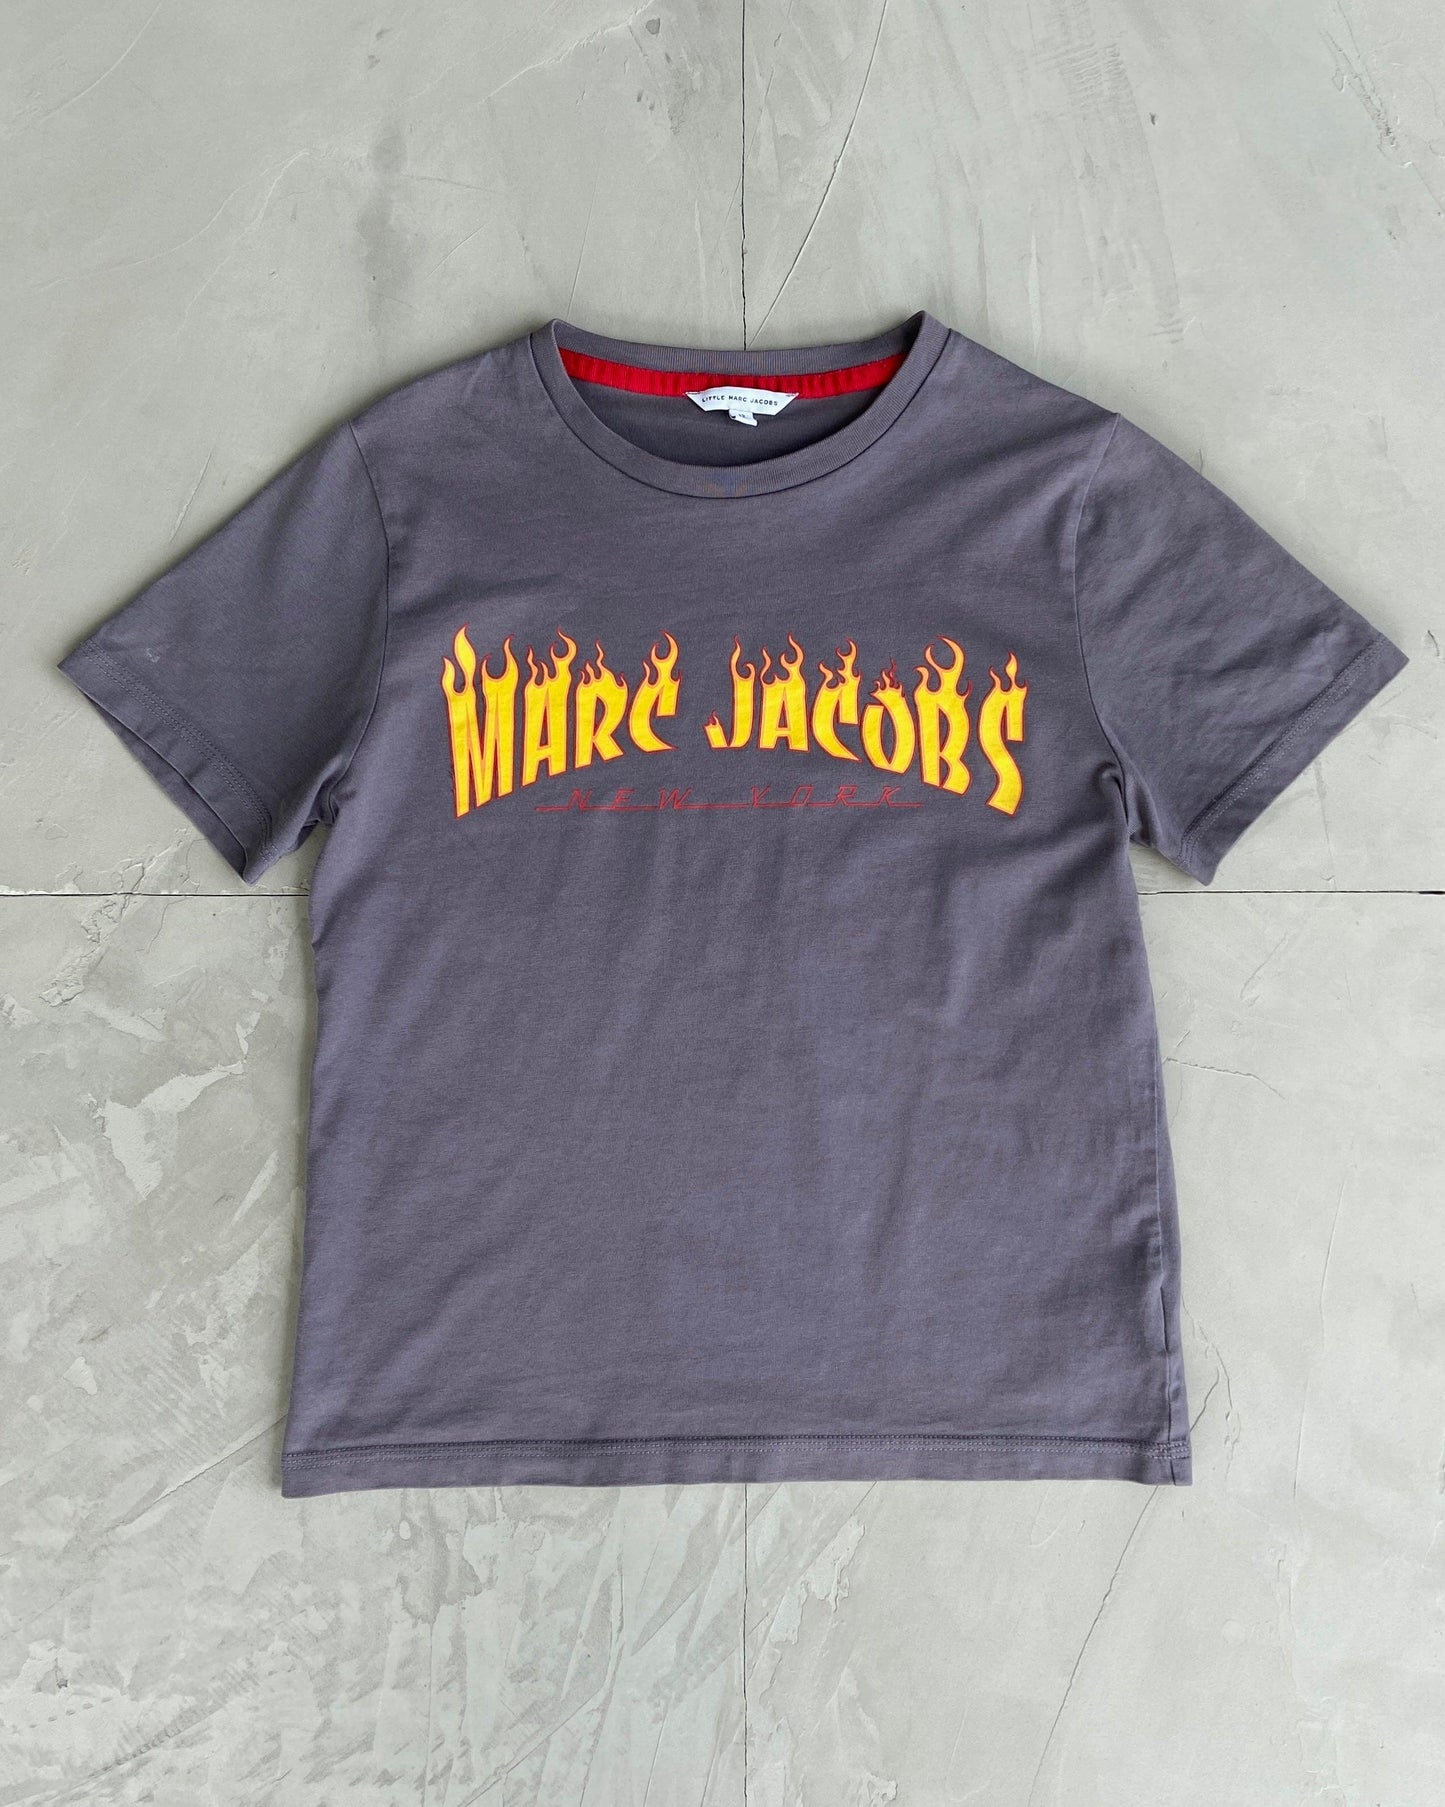 MARC JACOBS NYC 2000'S BABY TEE - S - Known Source